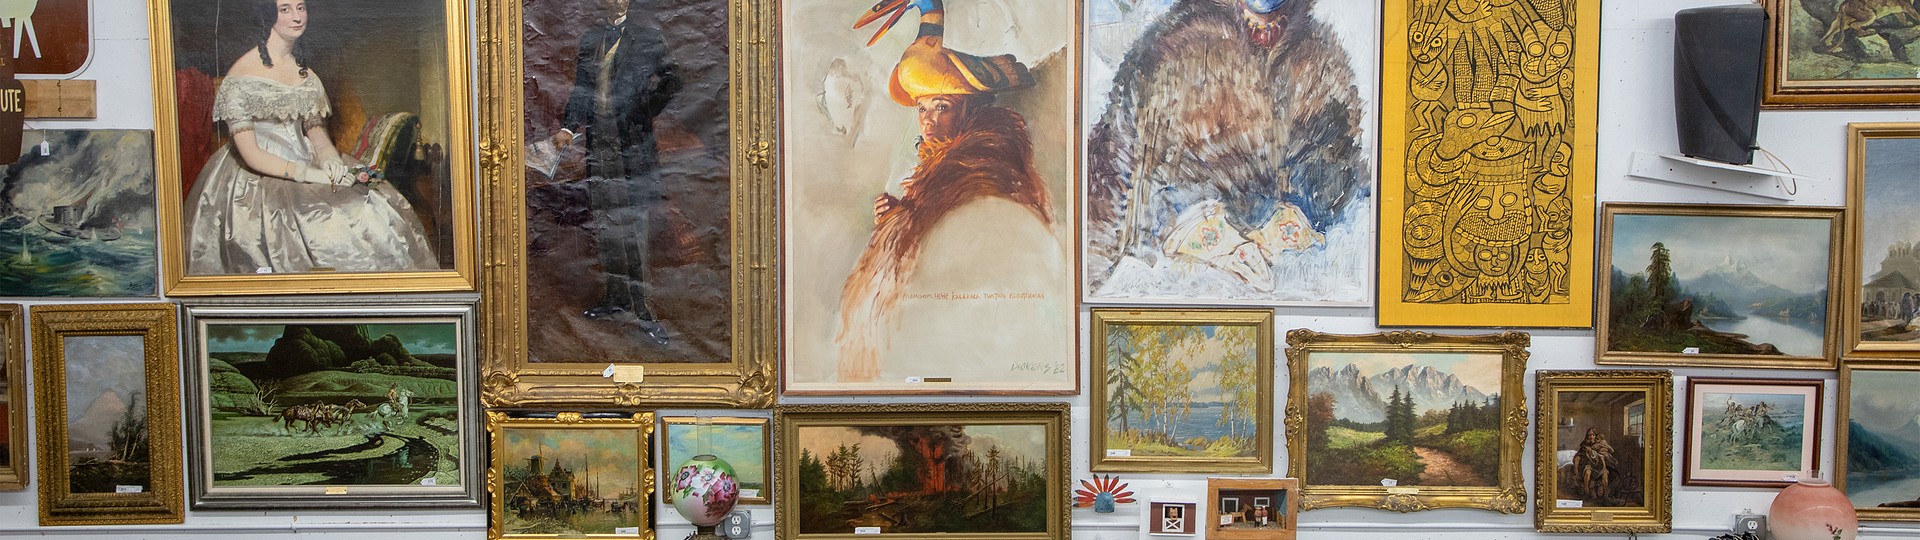 Early Art Connoisseur & Western Collector Auction  by North American Auction Company